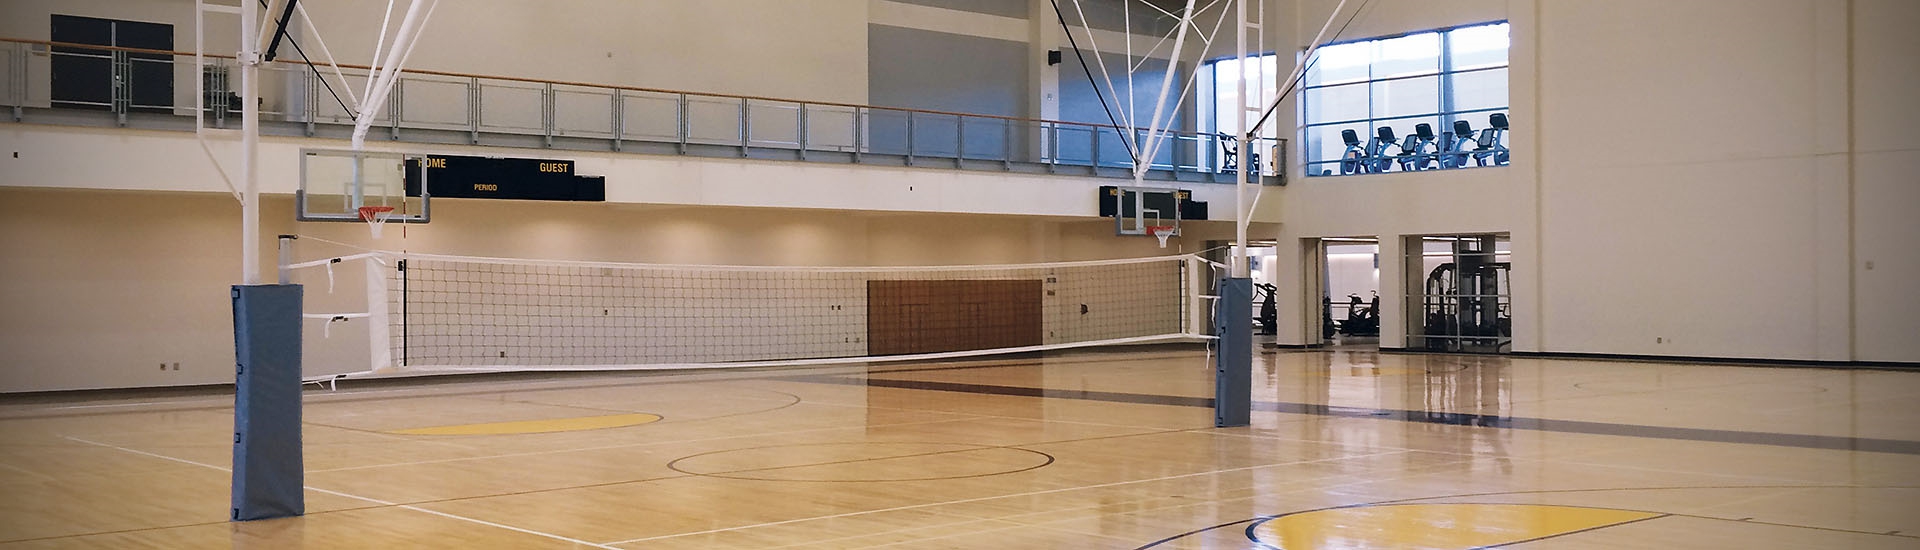 OVERHEAD VOLLEYBALL SYSTEM, BASKETBALL BACKSTOPS | Kennesaw State University